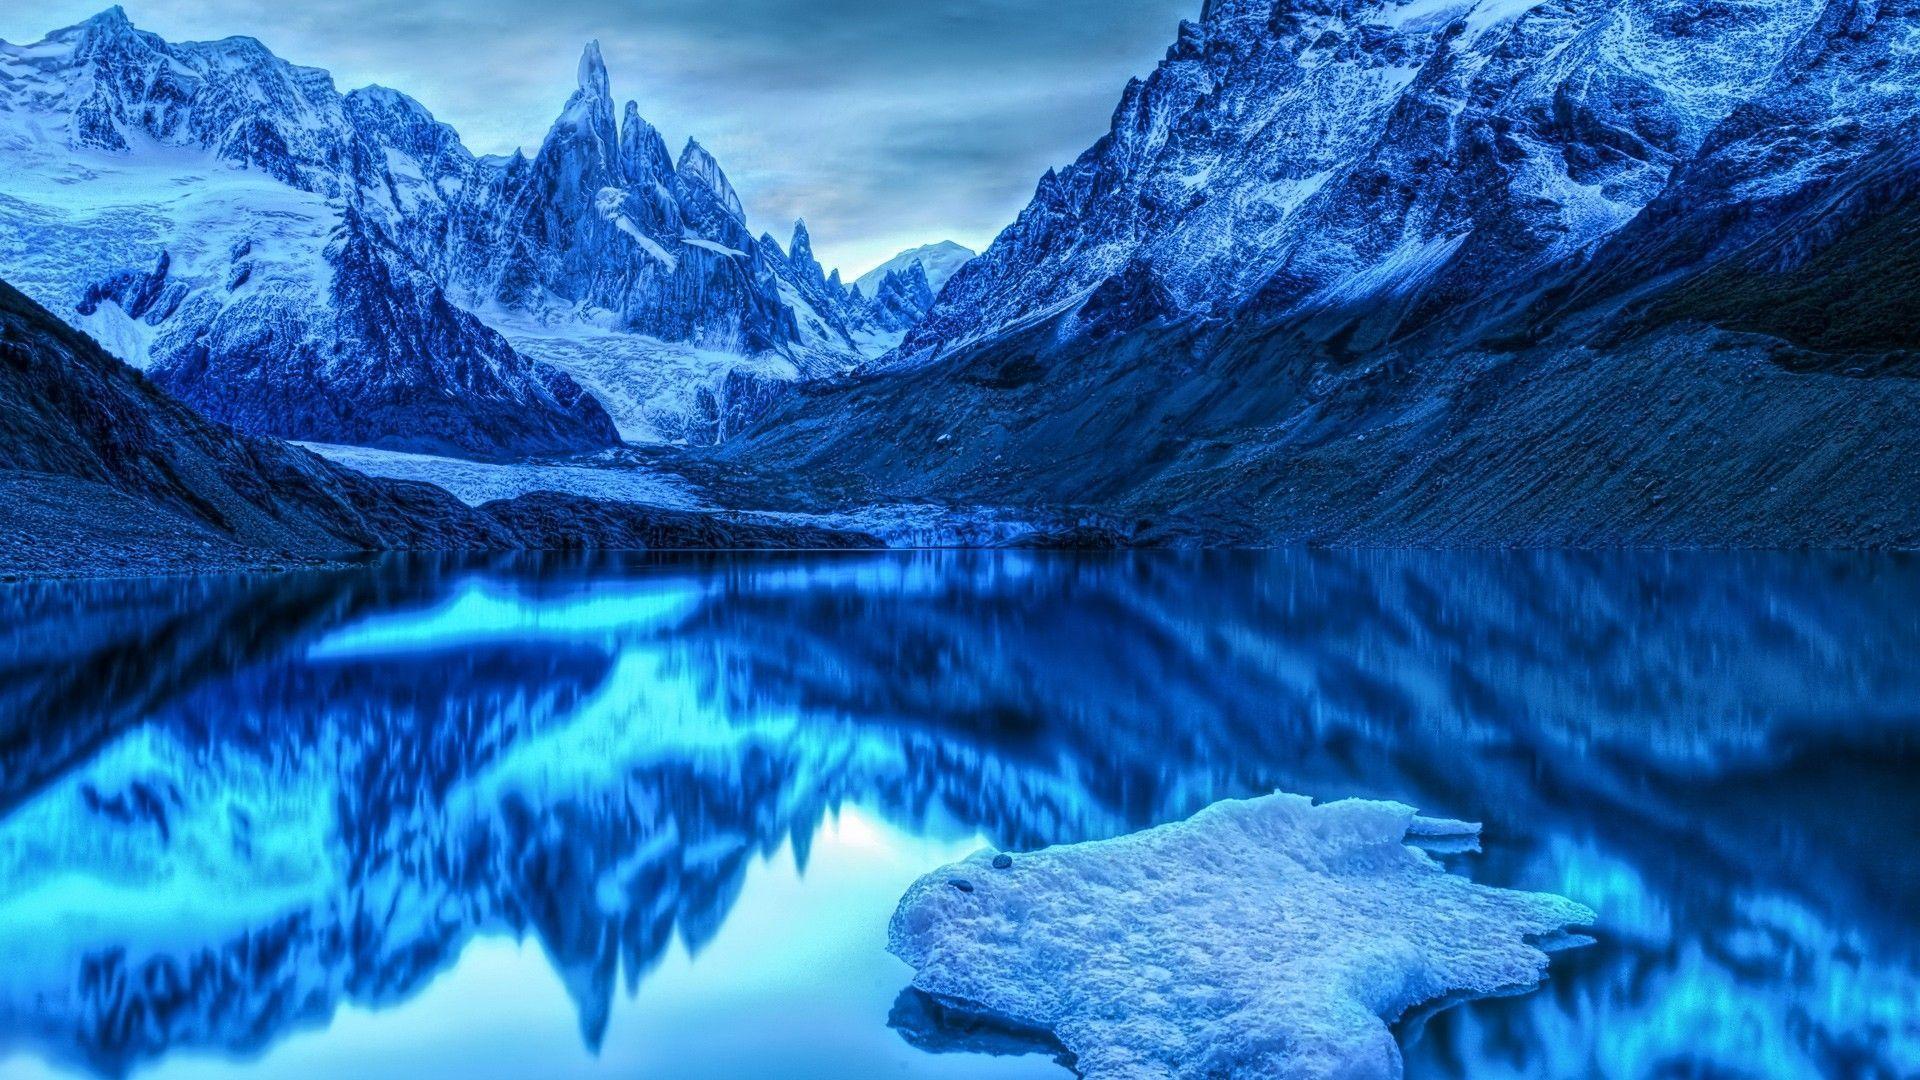 Lake In The Snowy Mountains Wallpaper 1920x1080 px Free Download